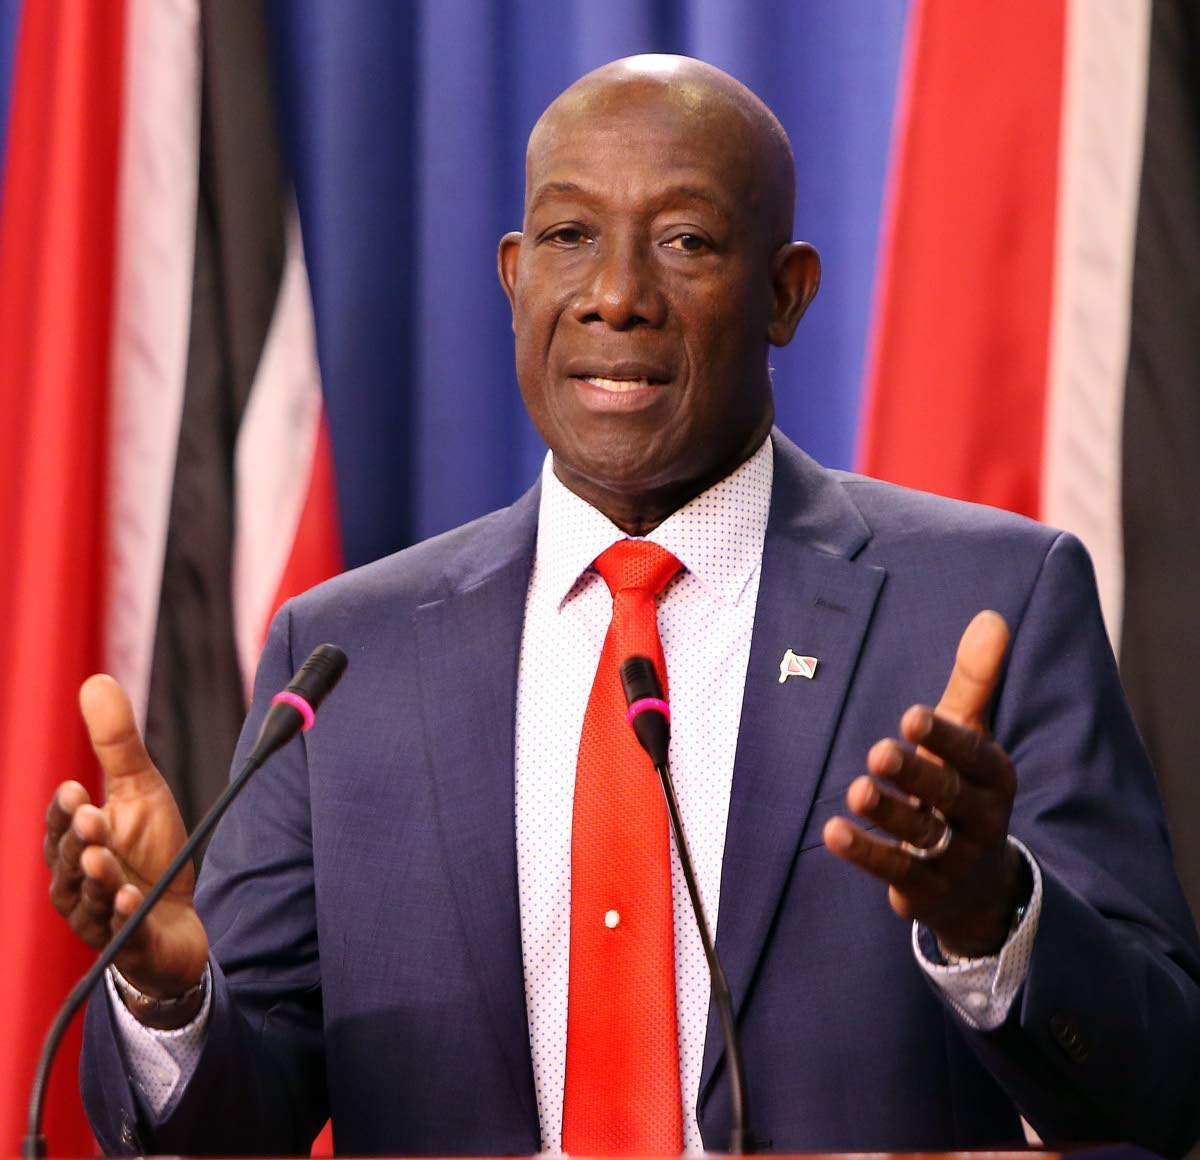 PM Rowley Urges Regional Leaders To Adopt “Grow Local, Eat Local” Model